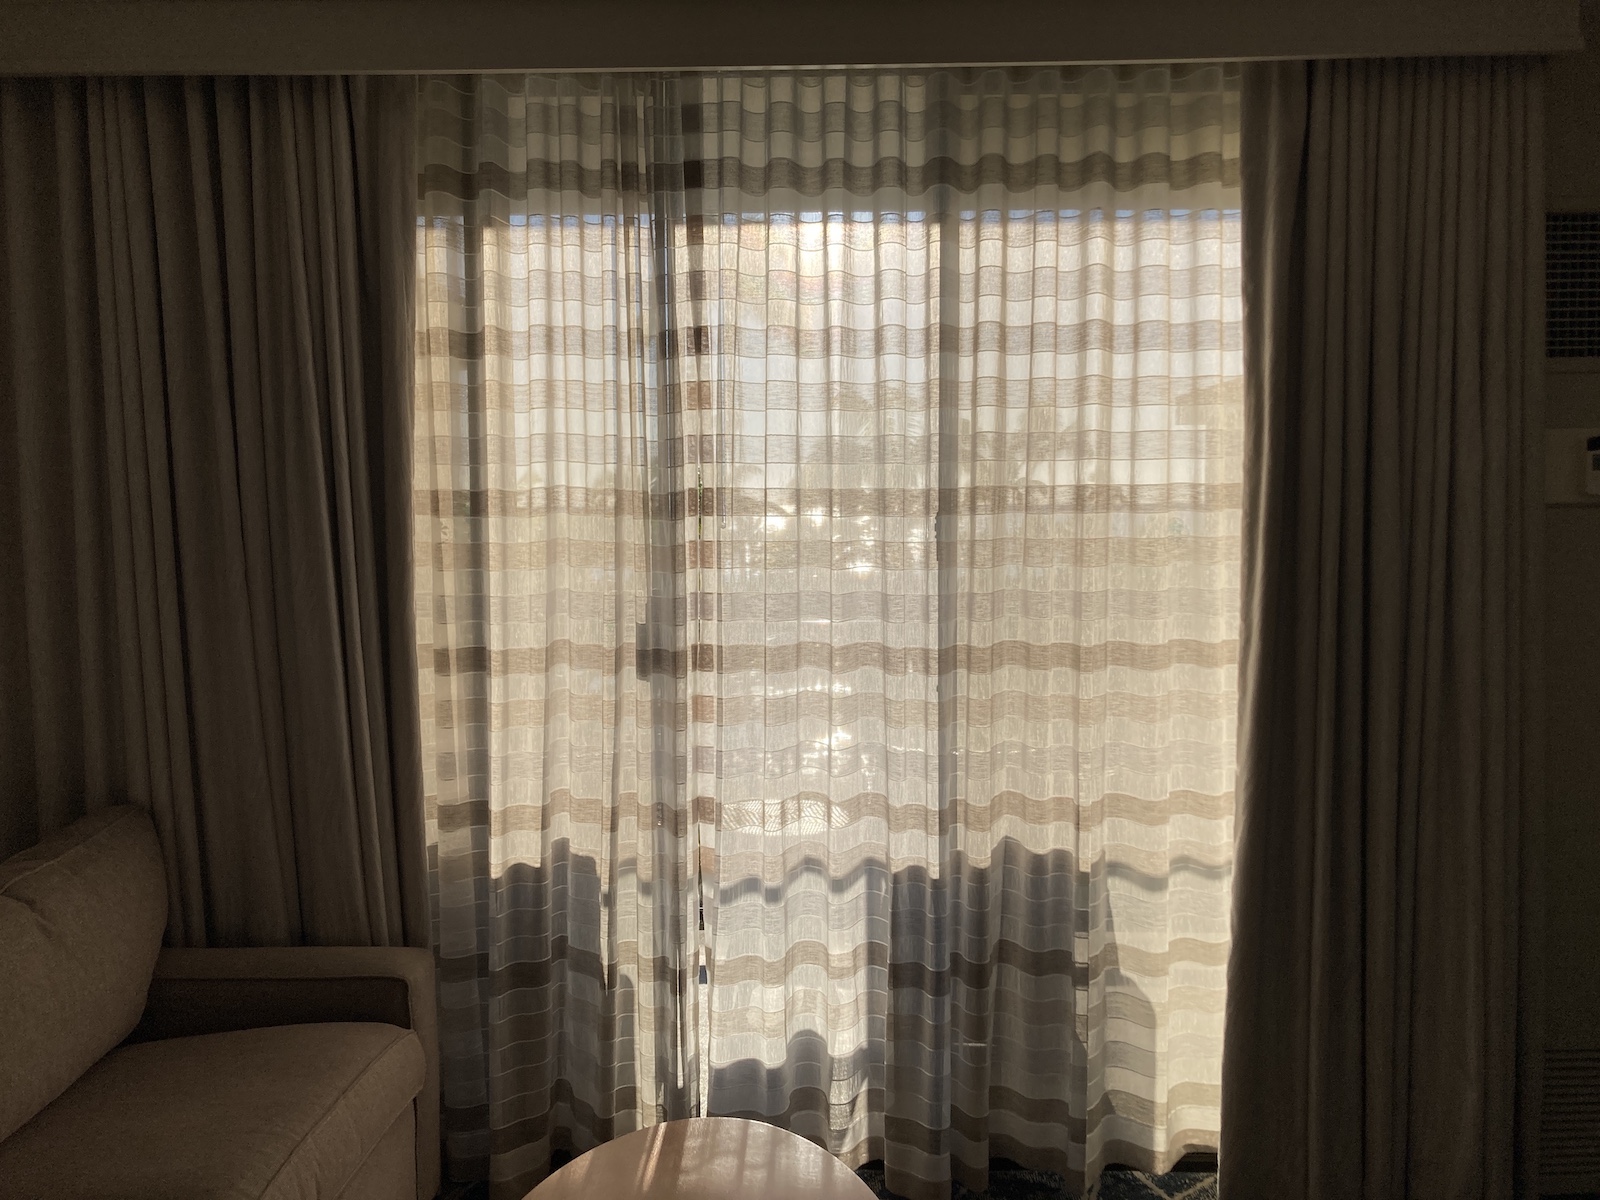 Image shows curtains closed over glass doors with sunshine beyond